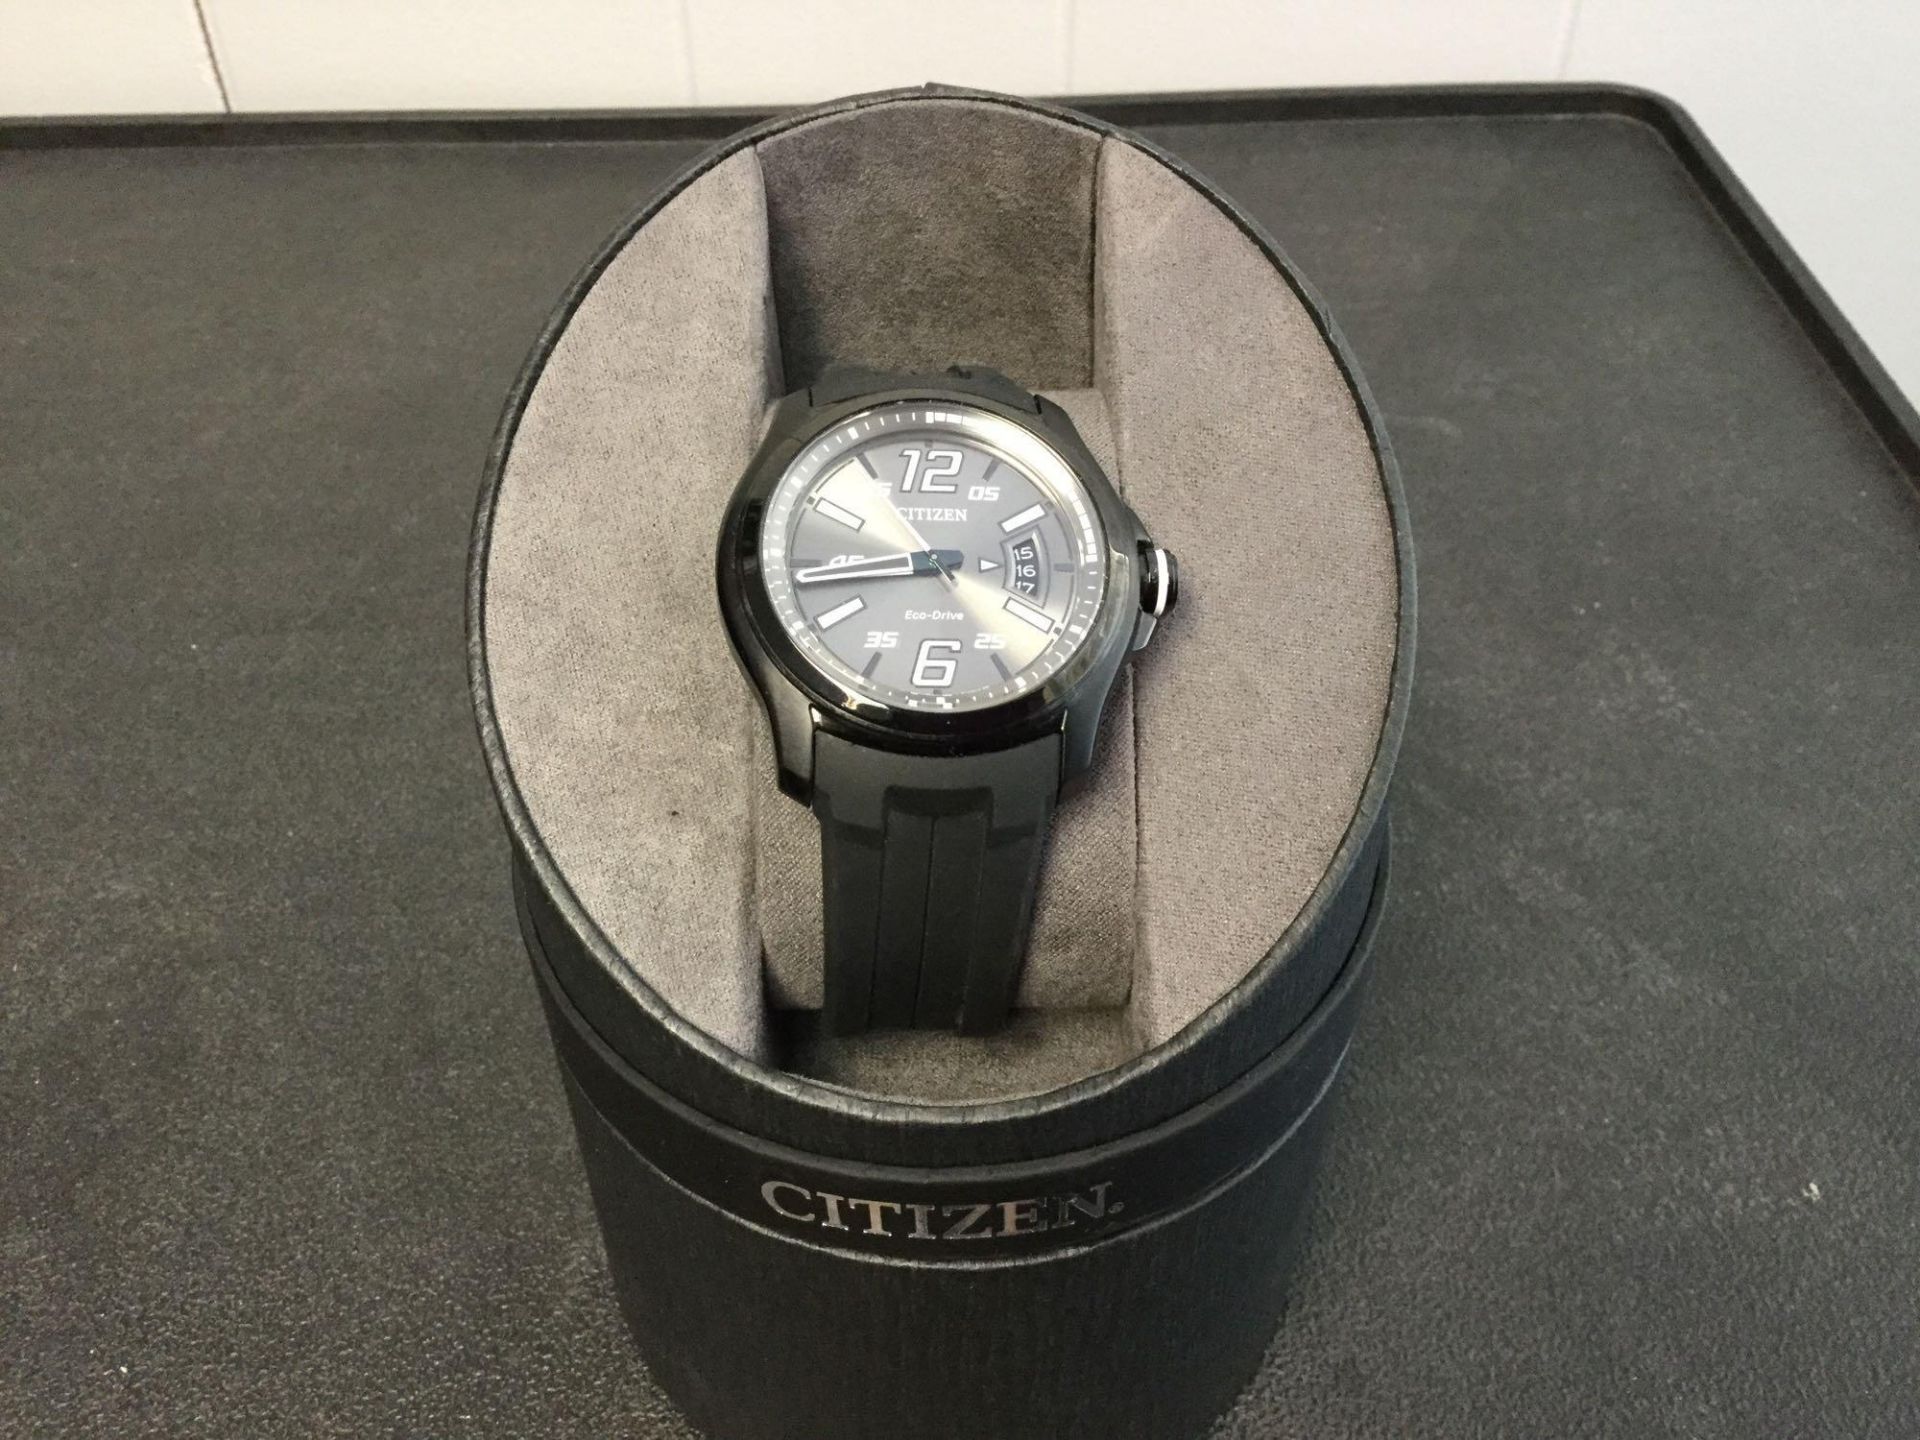 Citizen Drive Watch with Case and box - Image 2 of 4